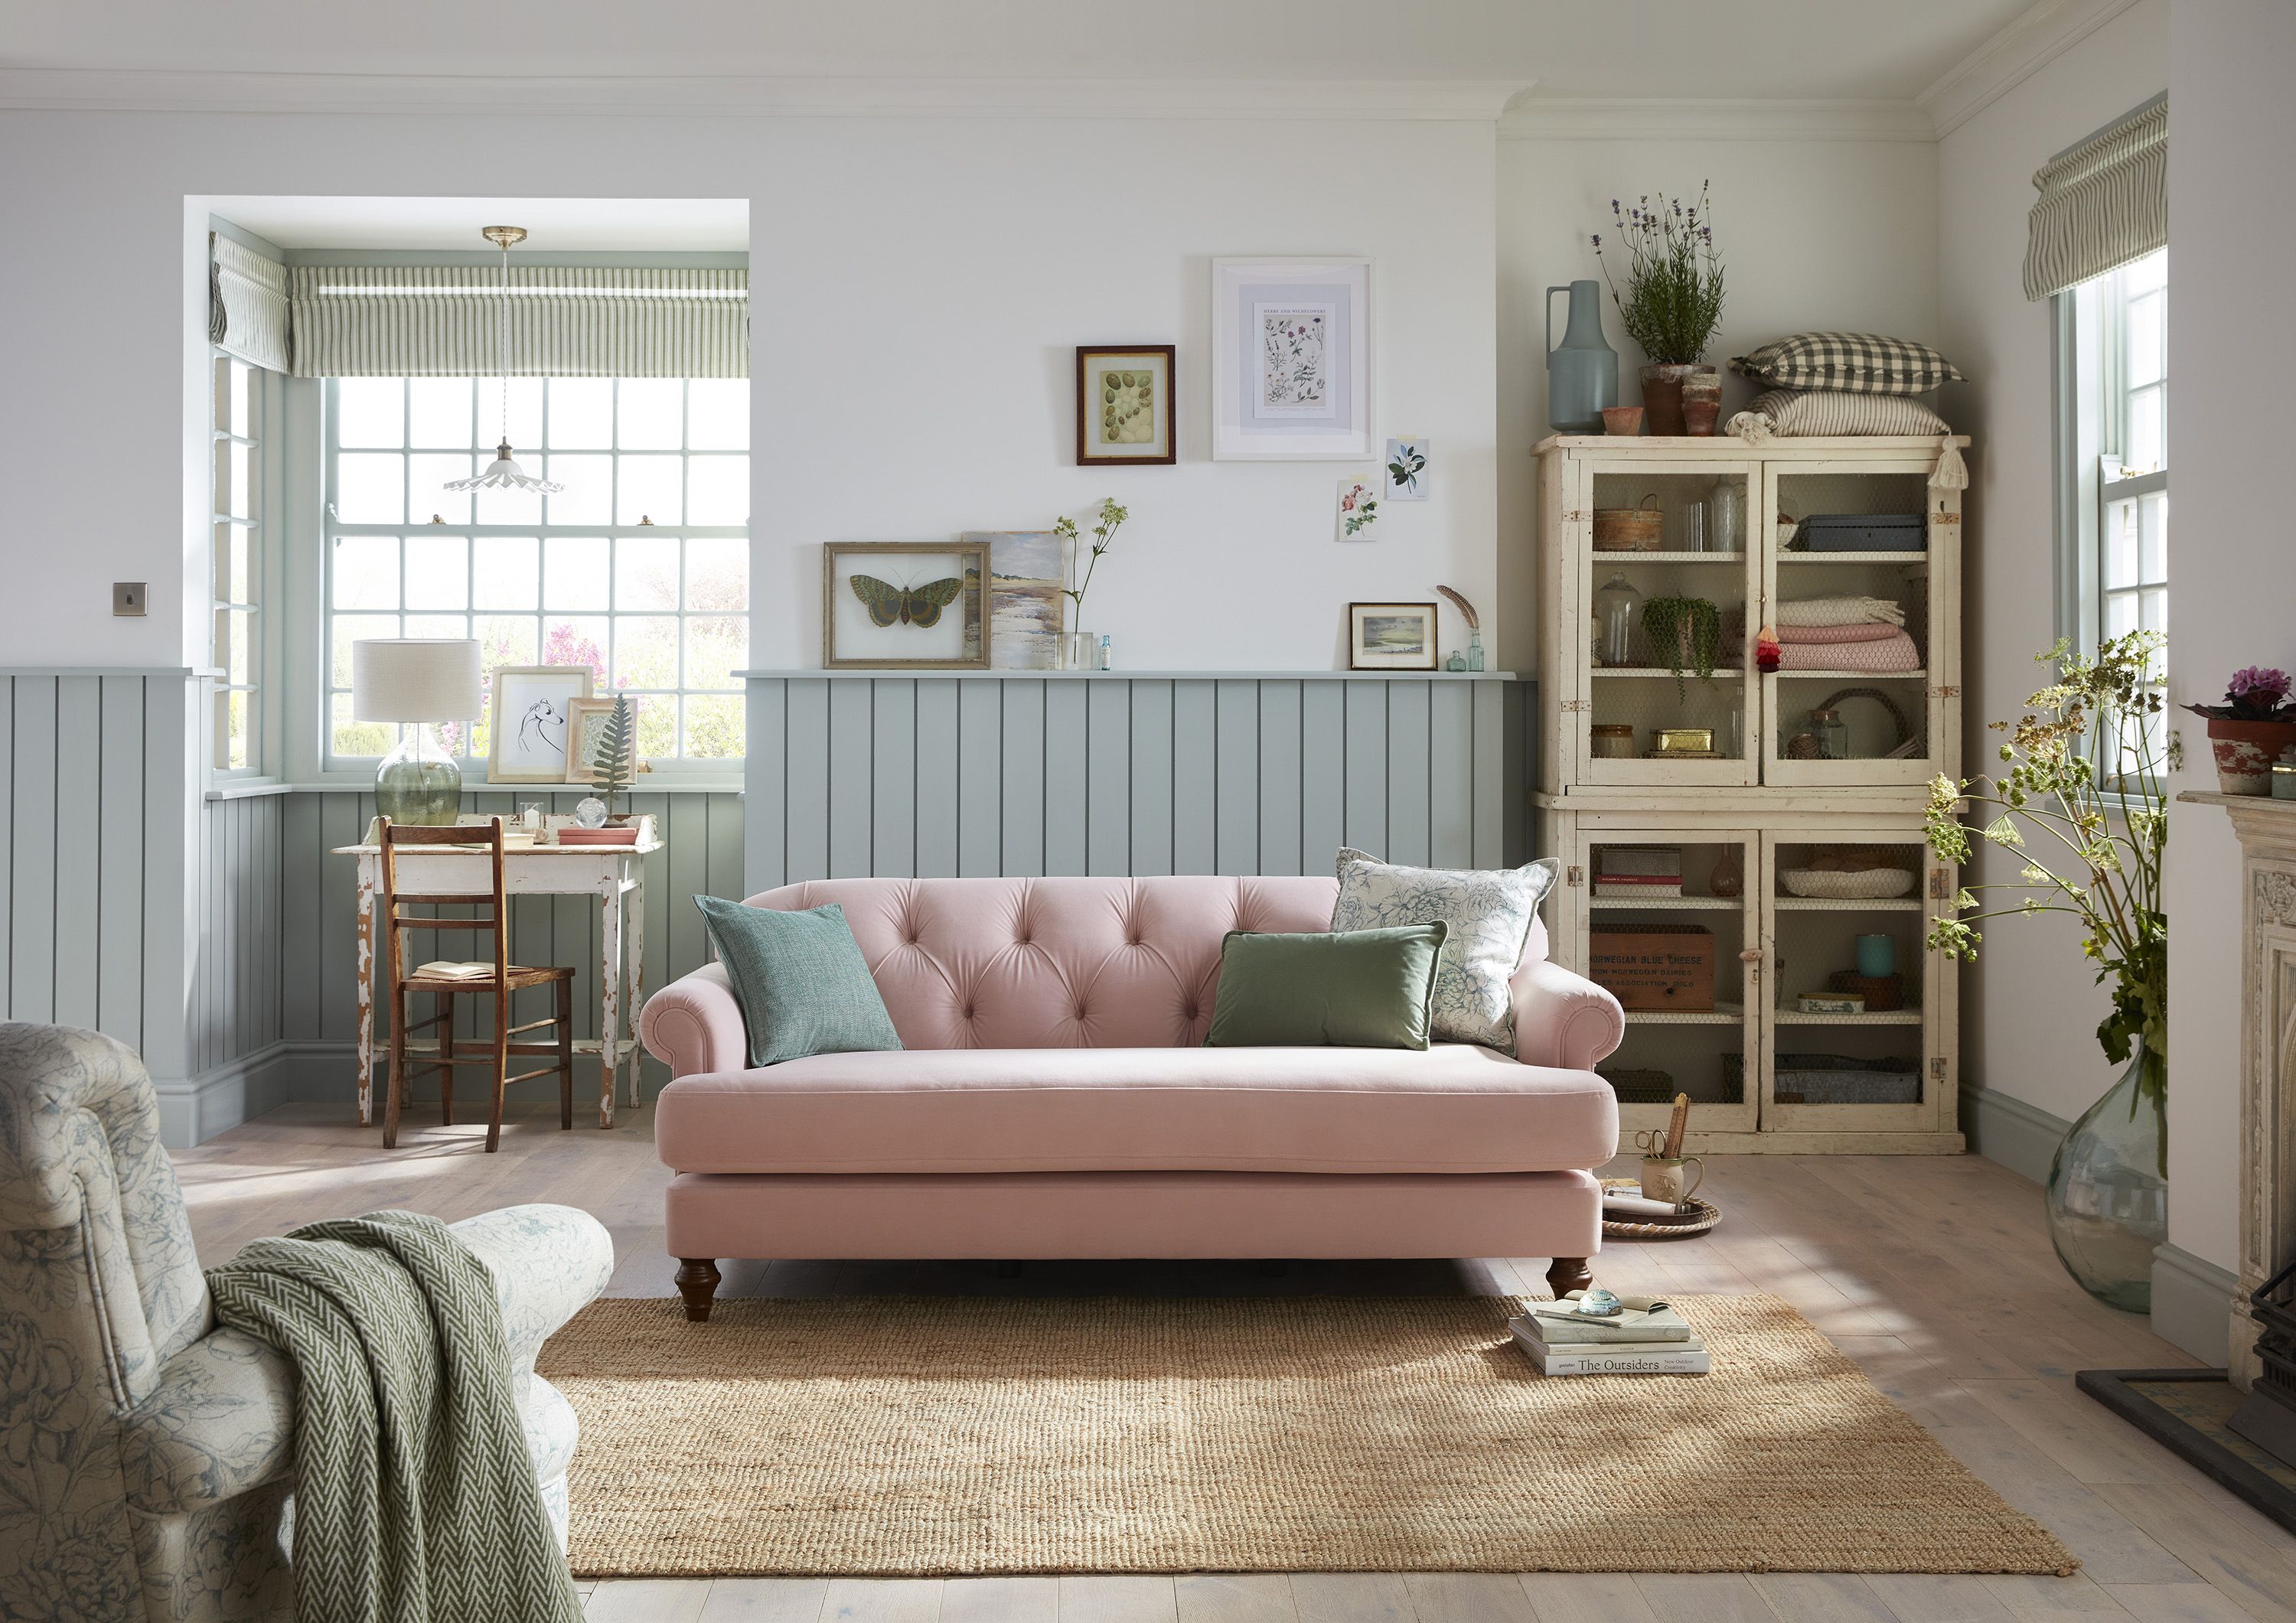 Meet the new Country Living sofas and armchairs at DFS